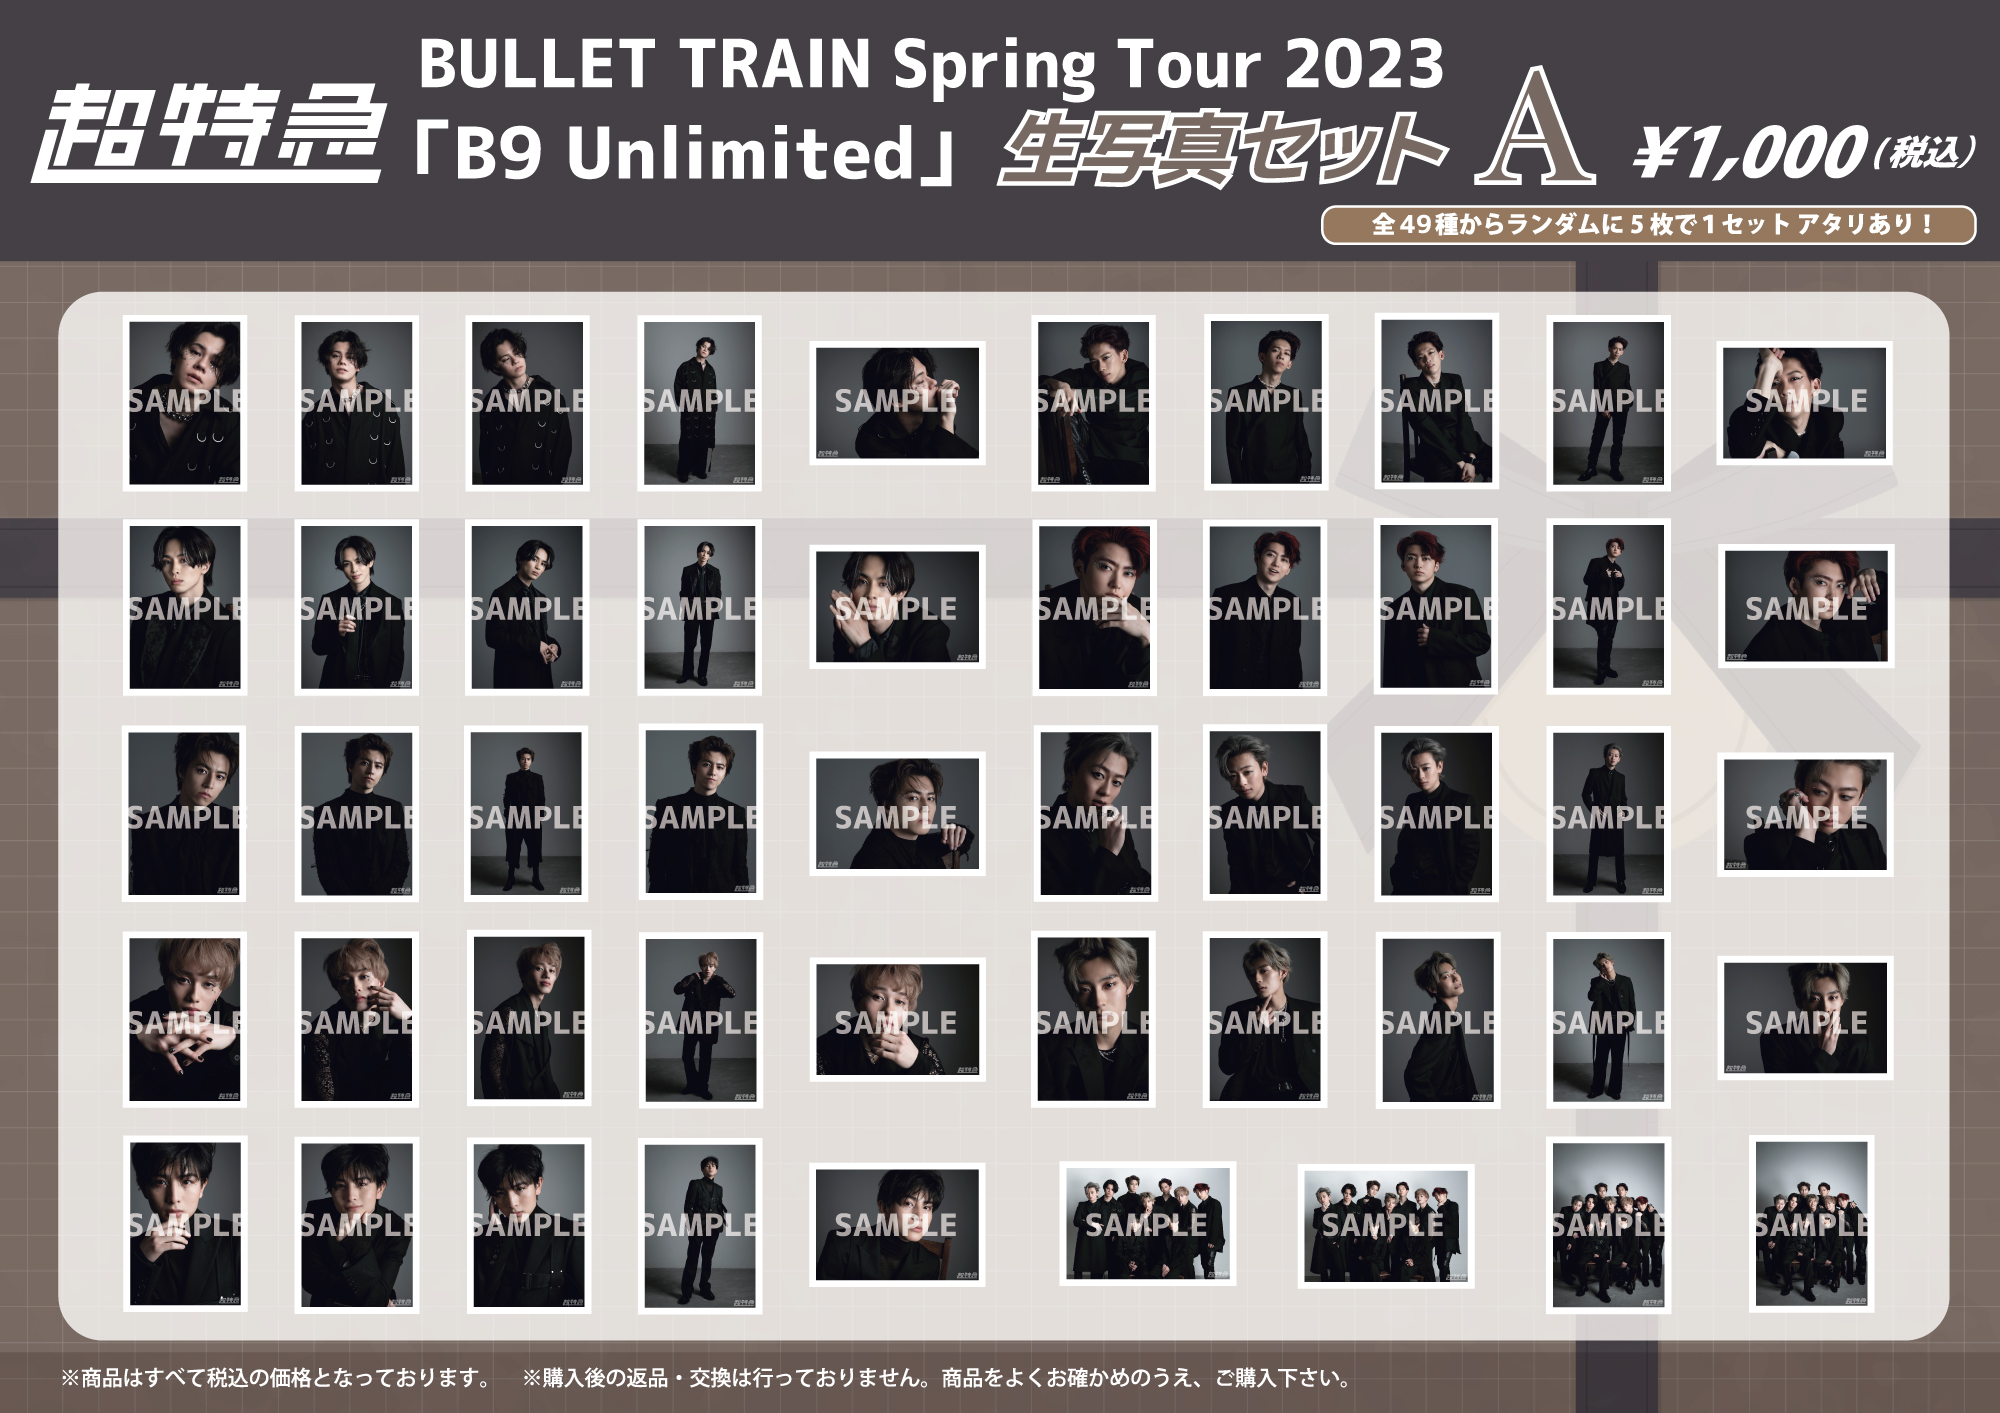 BULLET TRAIN Spring Tour 2023「B9 Unlimited」8号車の日 会場販売の ...